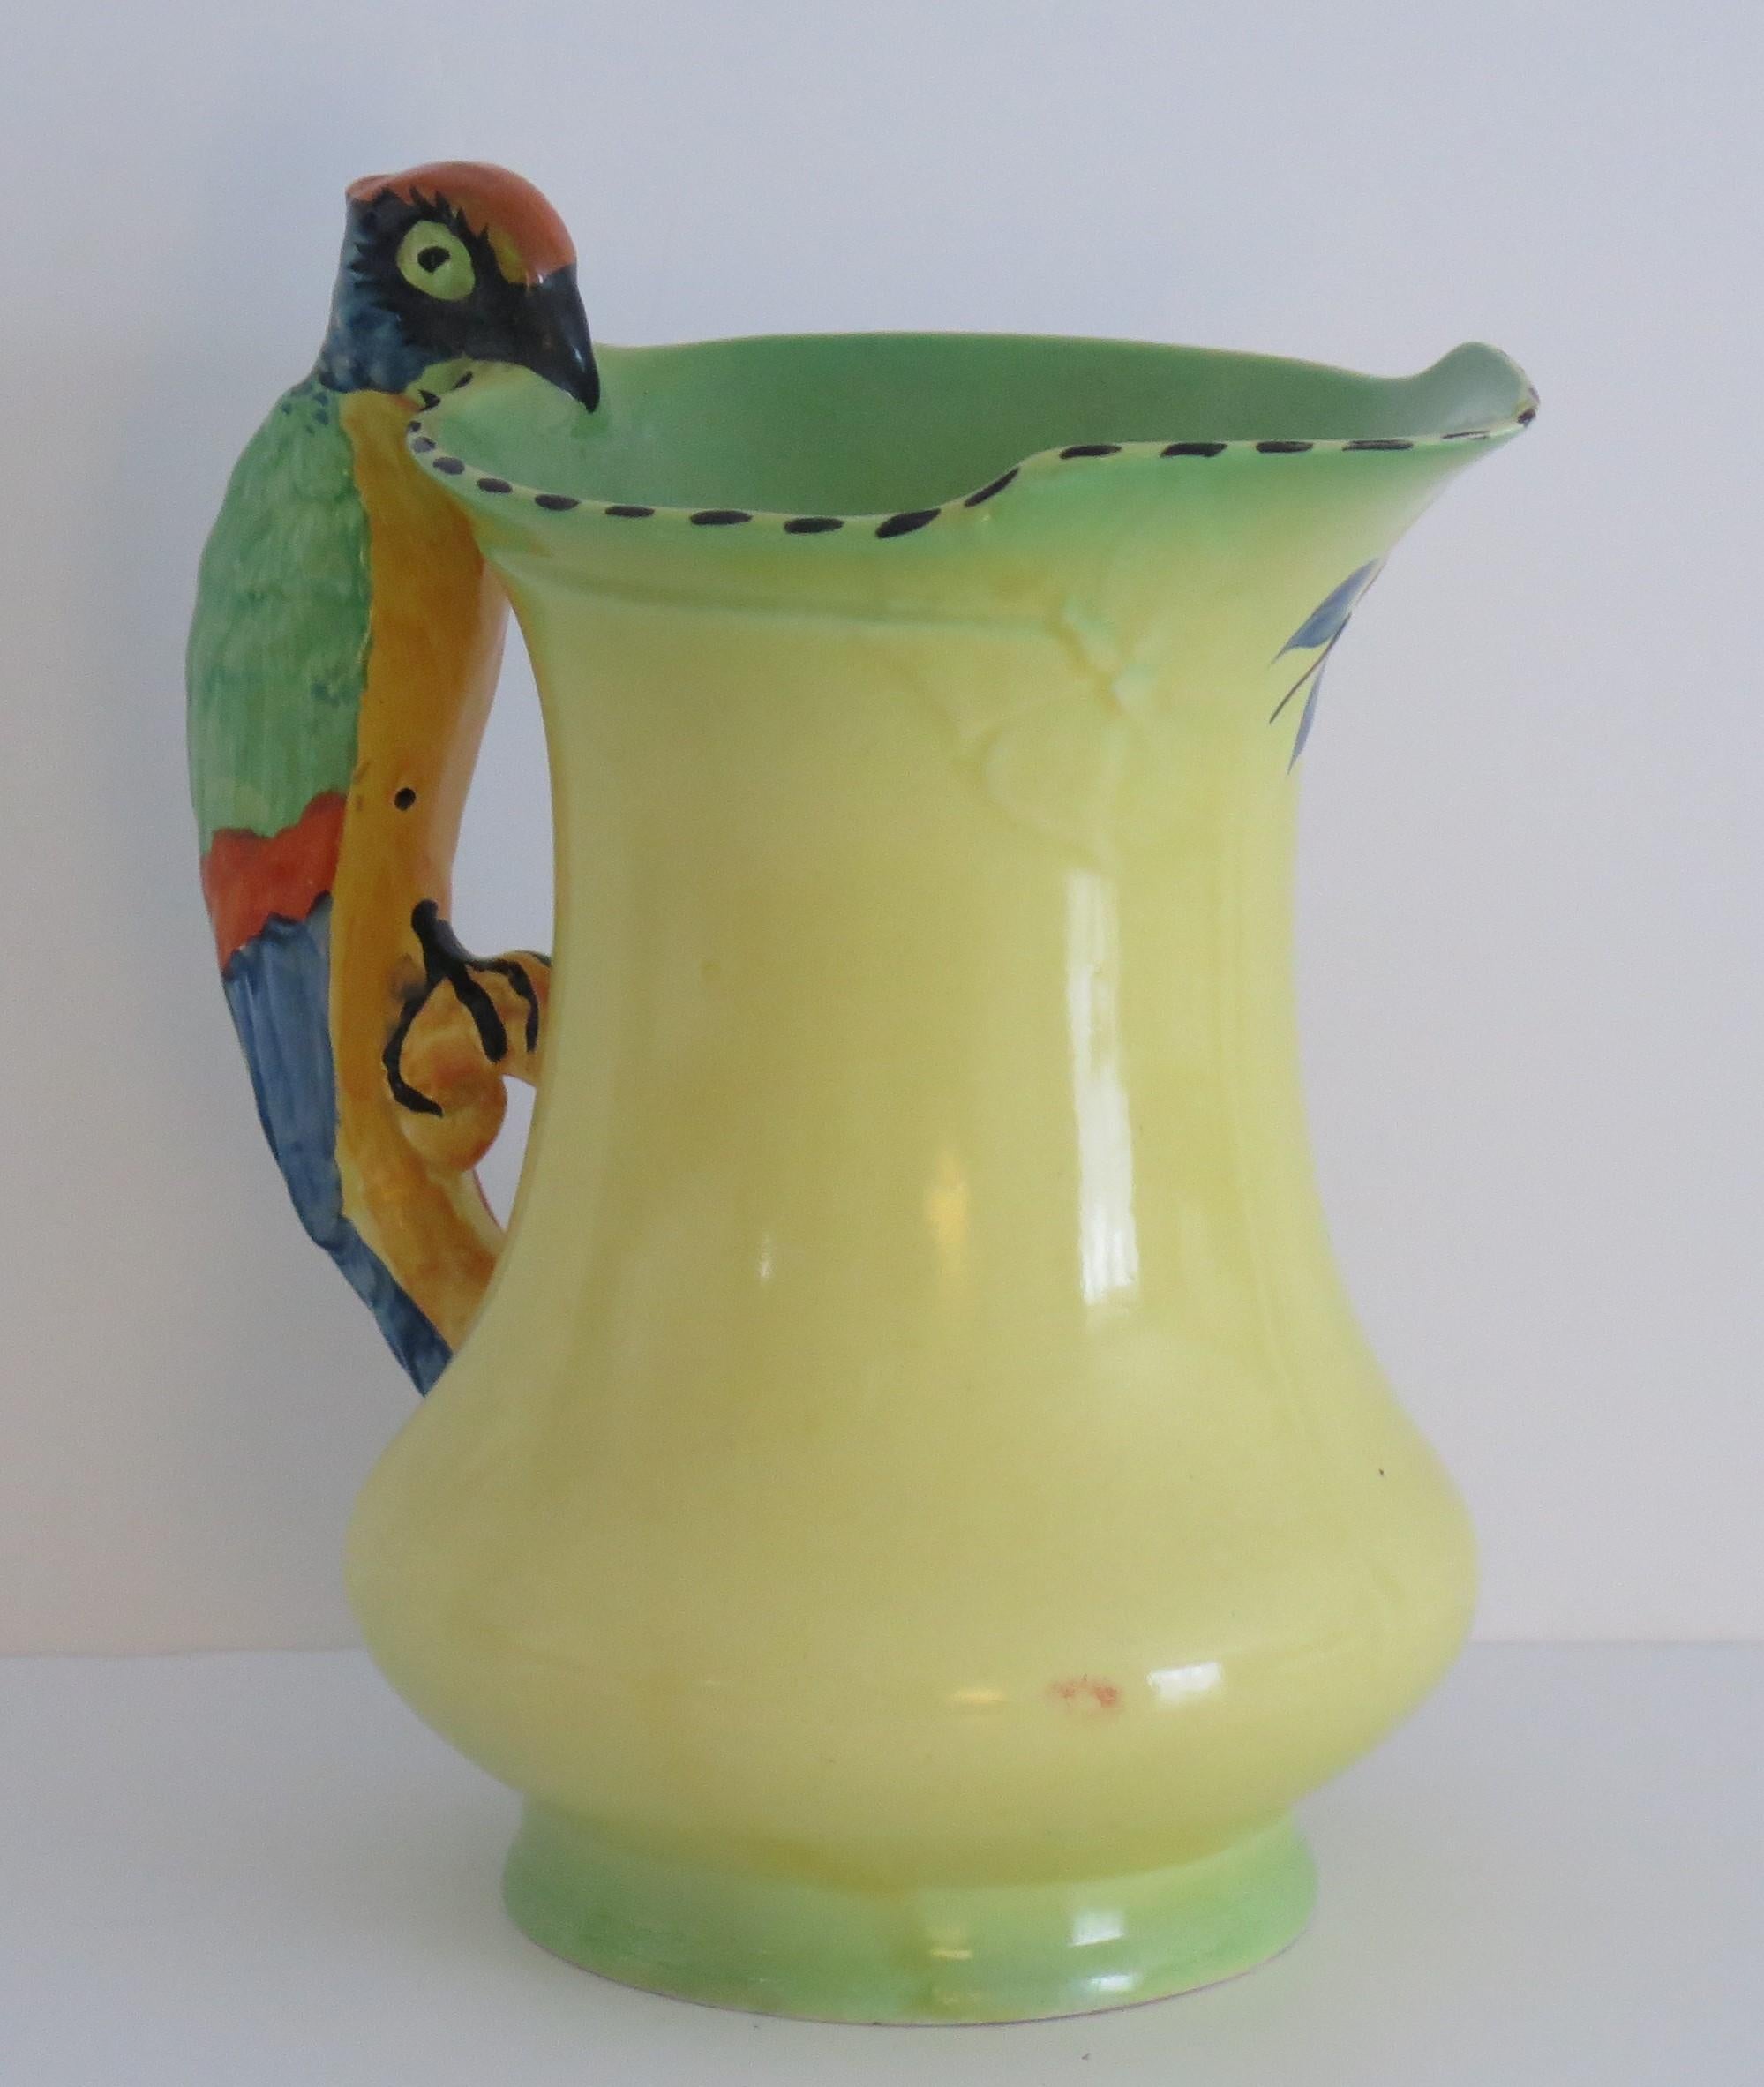 English Art Deco Burleigh Ware Pottery Jug or Pitcher Parrot Handle Hand-Painted, 1930s For Sale